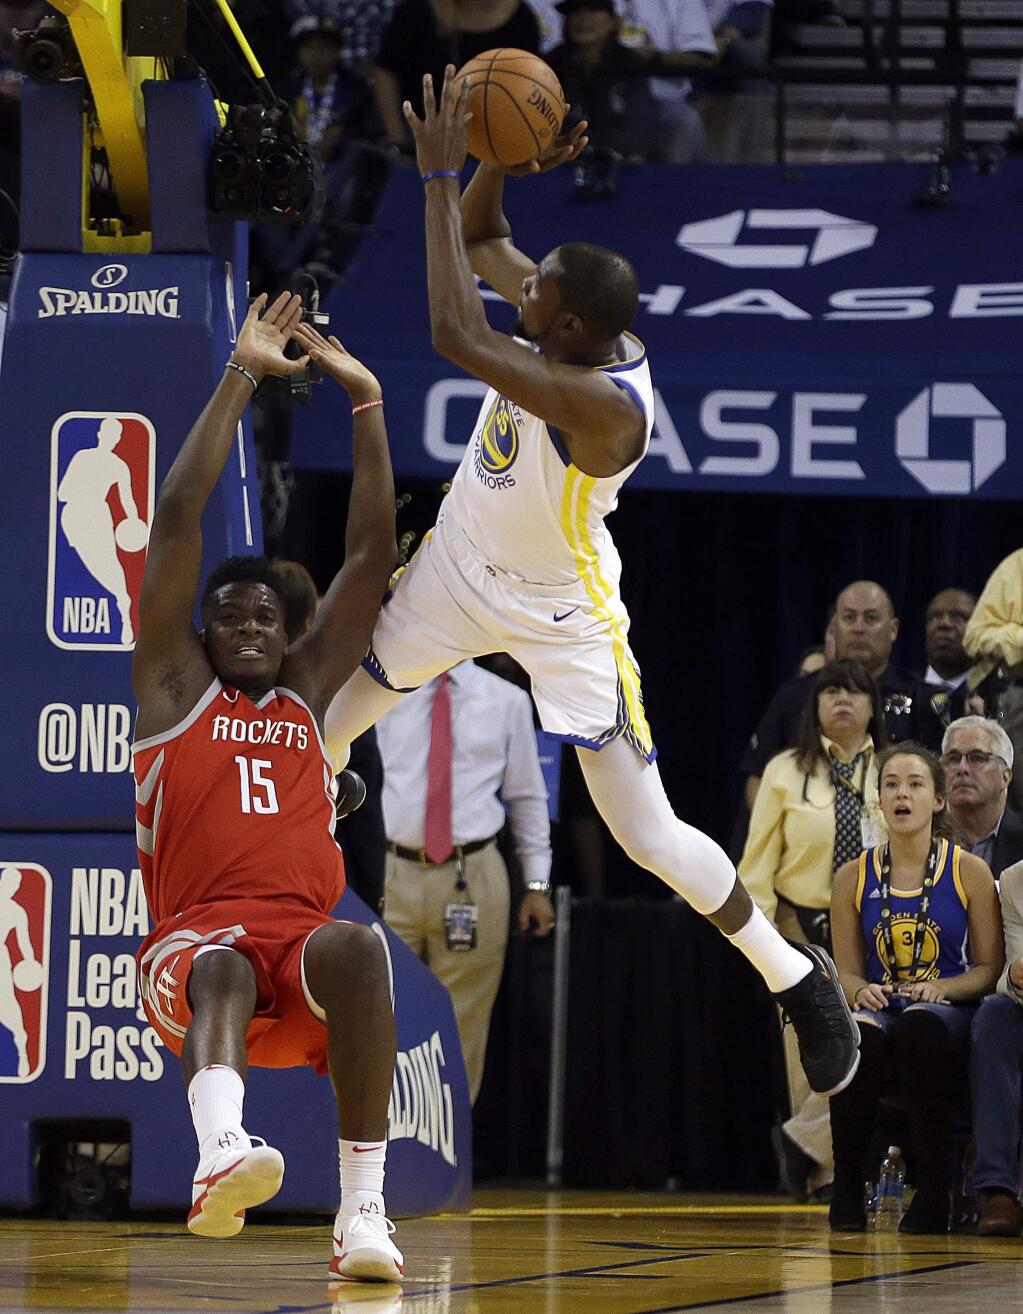 The Golden State Warriors' Kevin Durant, right, shoots over the Houston Rockets' Clint Capela (15) during the first quarter Tuesday, Oct. 17, 2017, in Oakland. (AP Photo/Ben Margot)